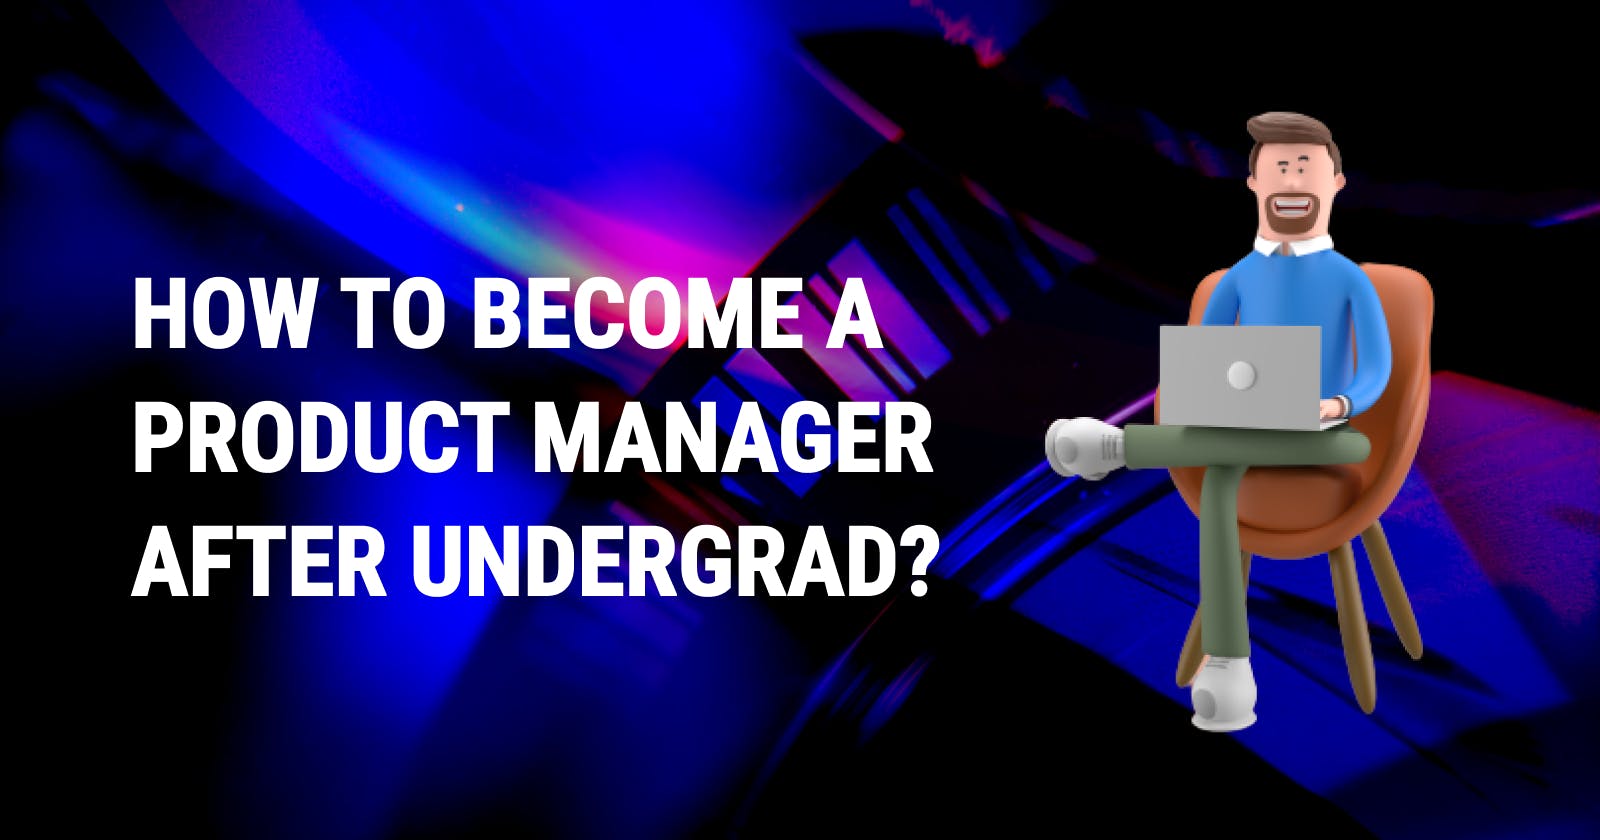 How to Become a Product Manager After Undergrad?